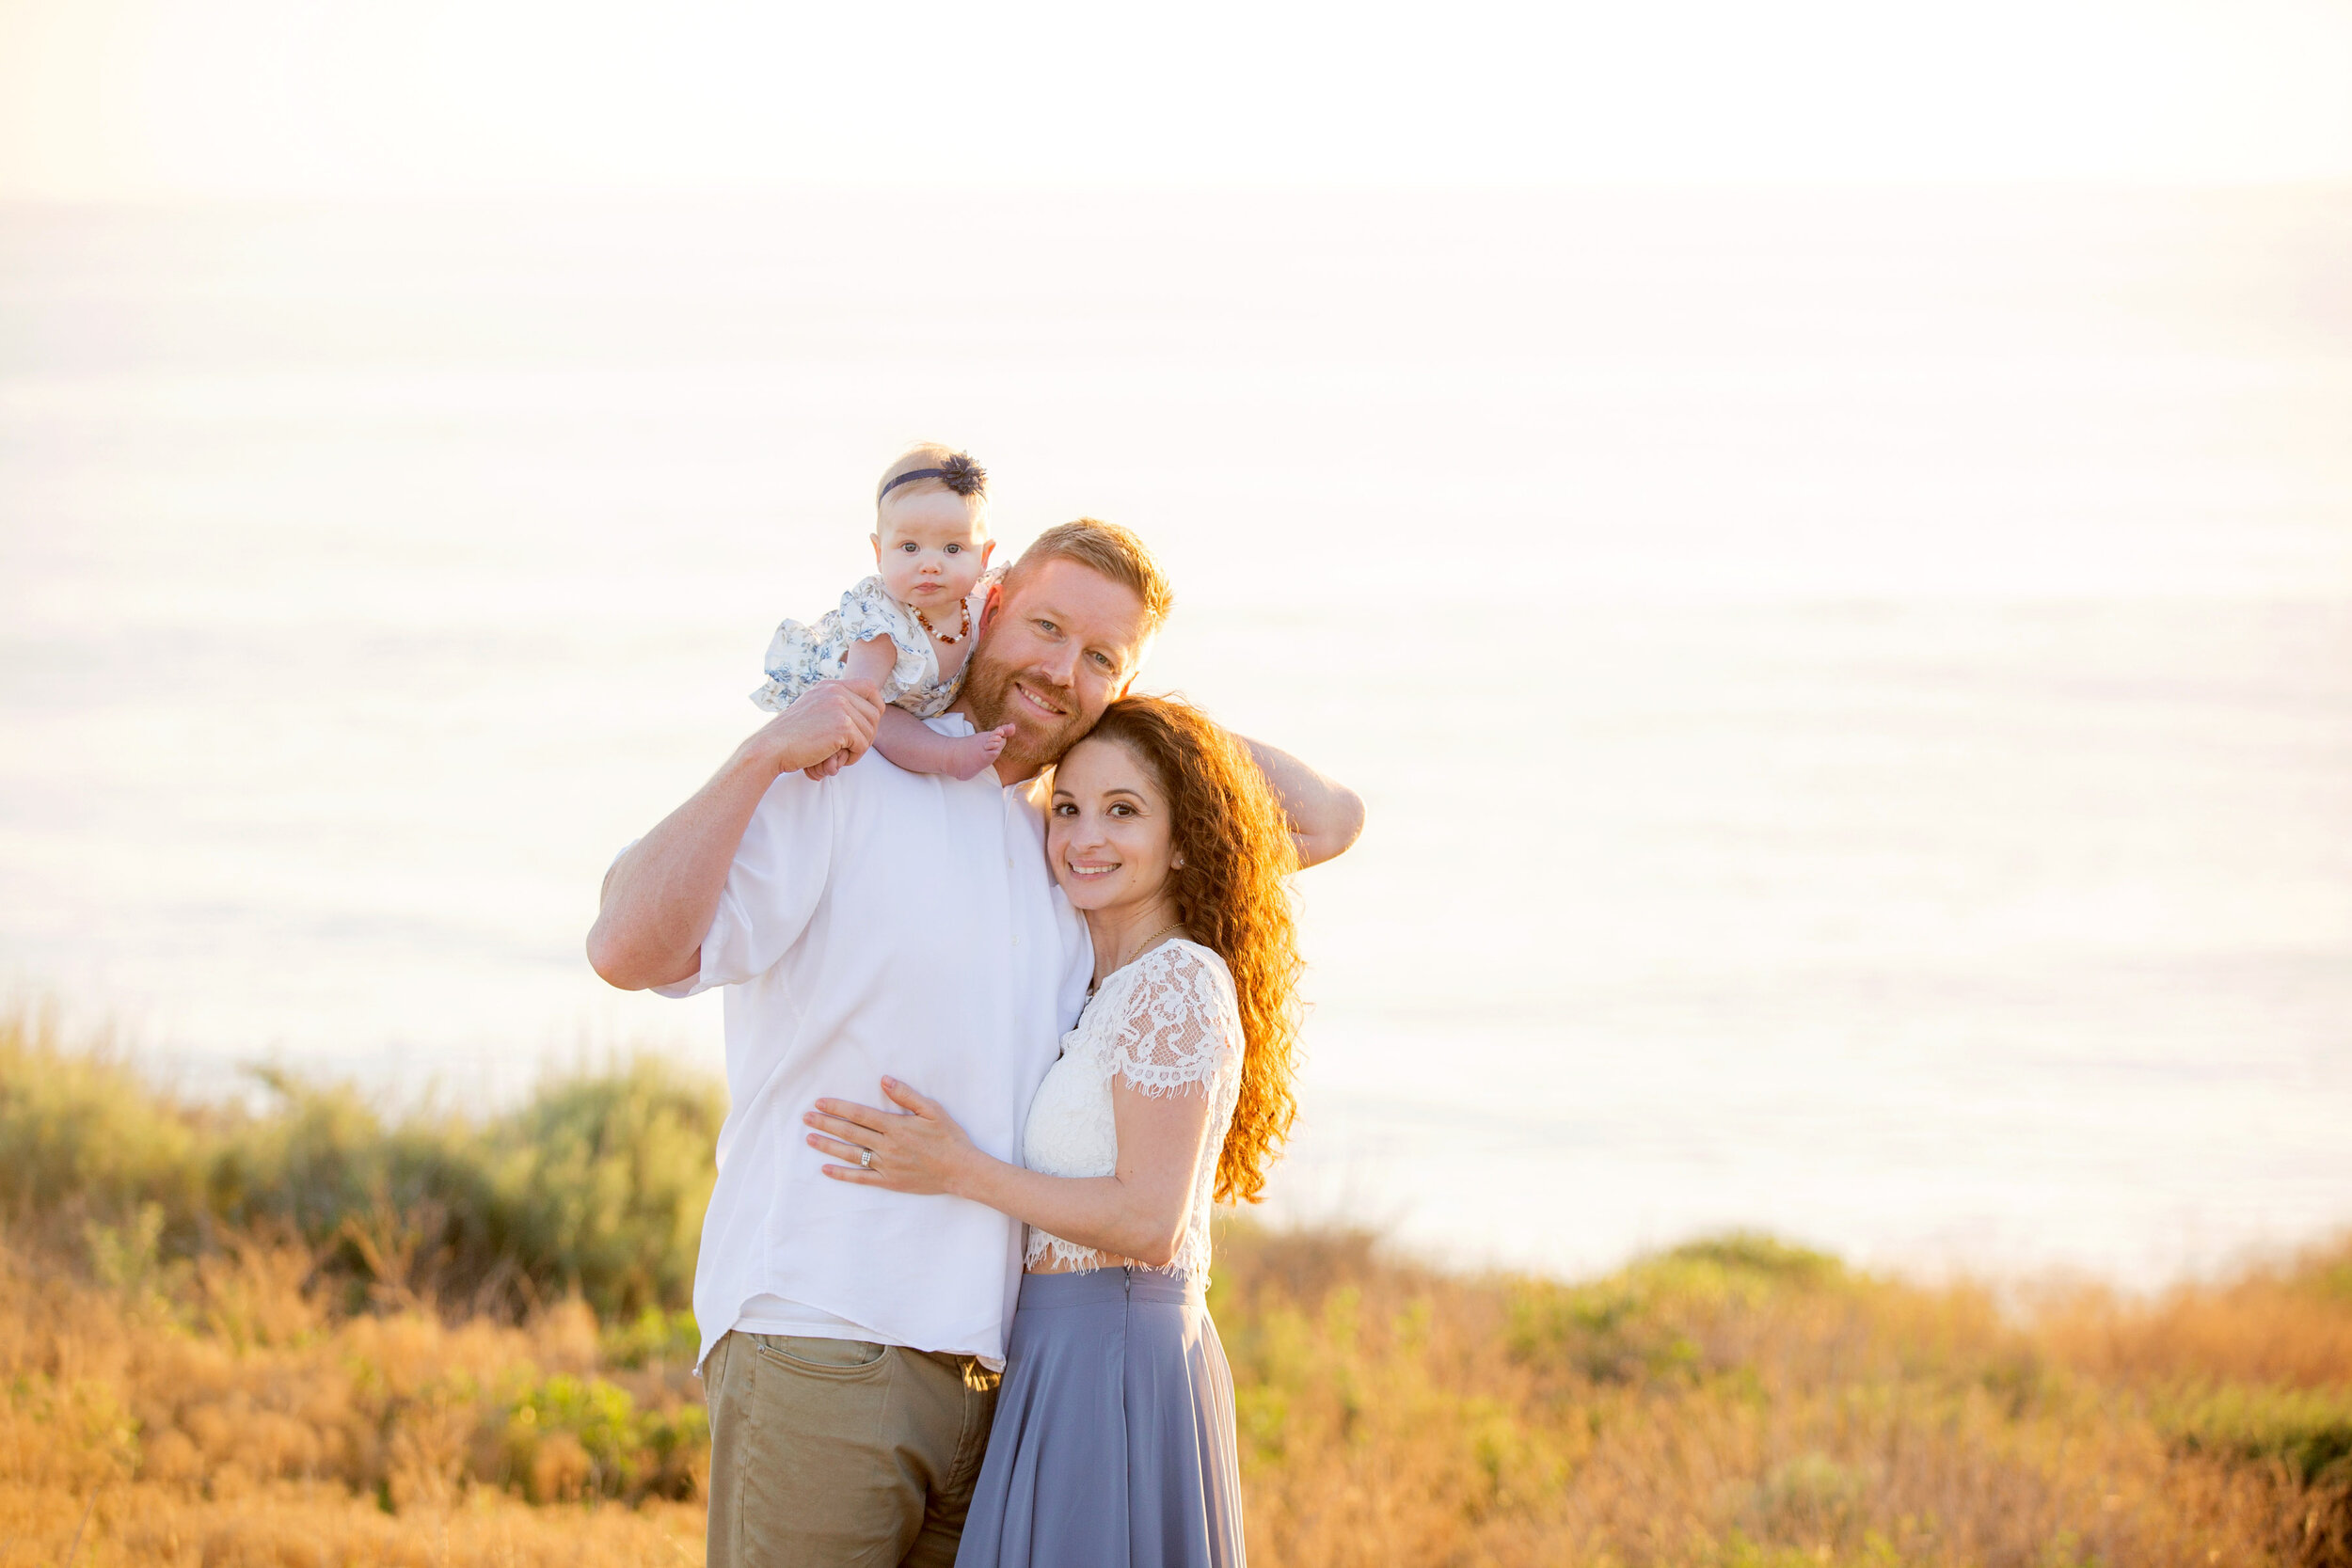 CRYSTAL-COVE-STATE-PARK-FAMILY-PHOTOS-BROOKE-TOBIN-PHOTOGRAPHY_48.jpg